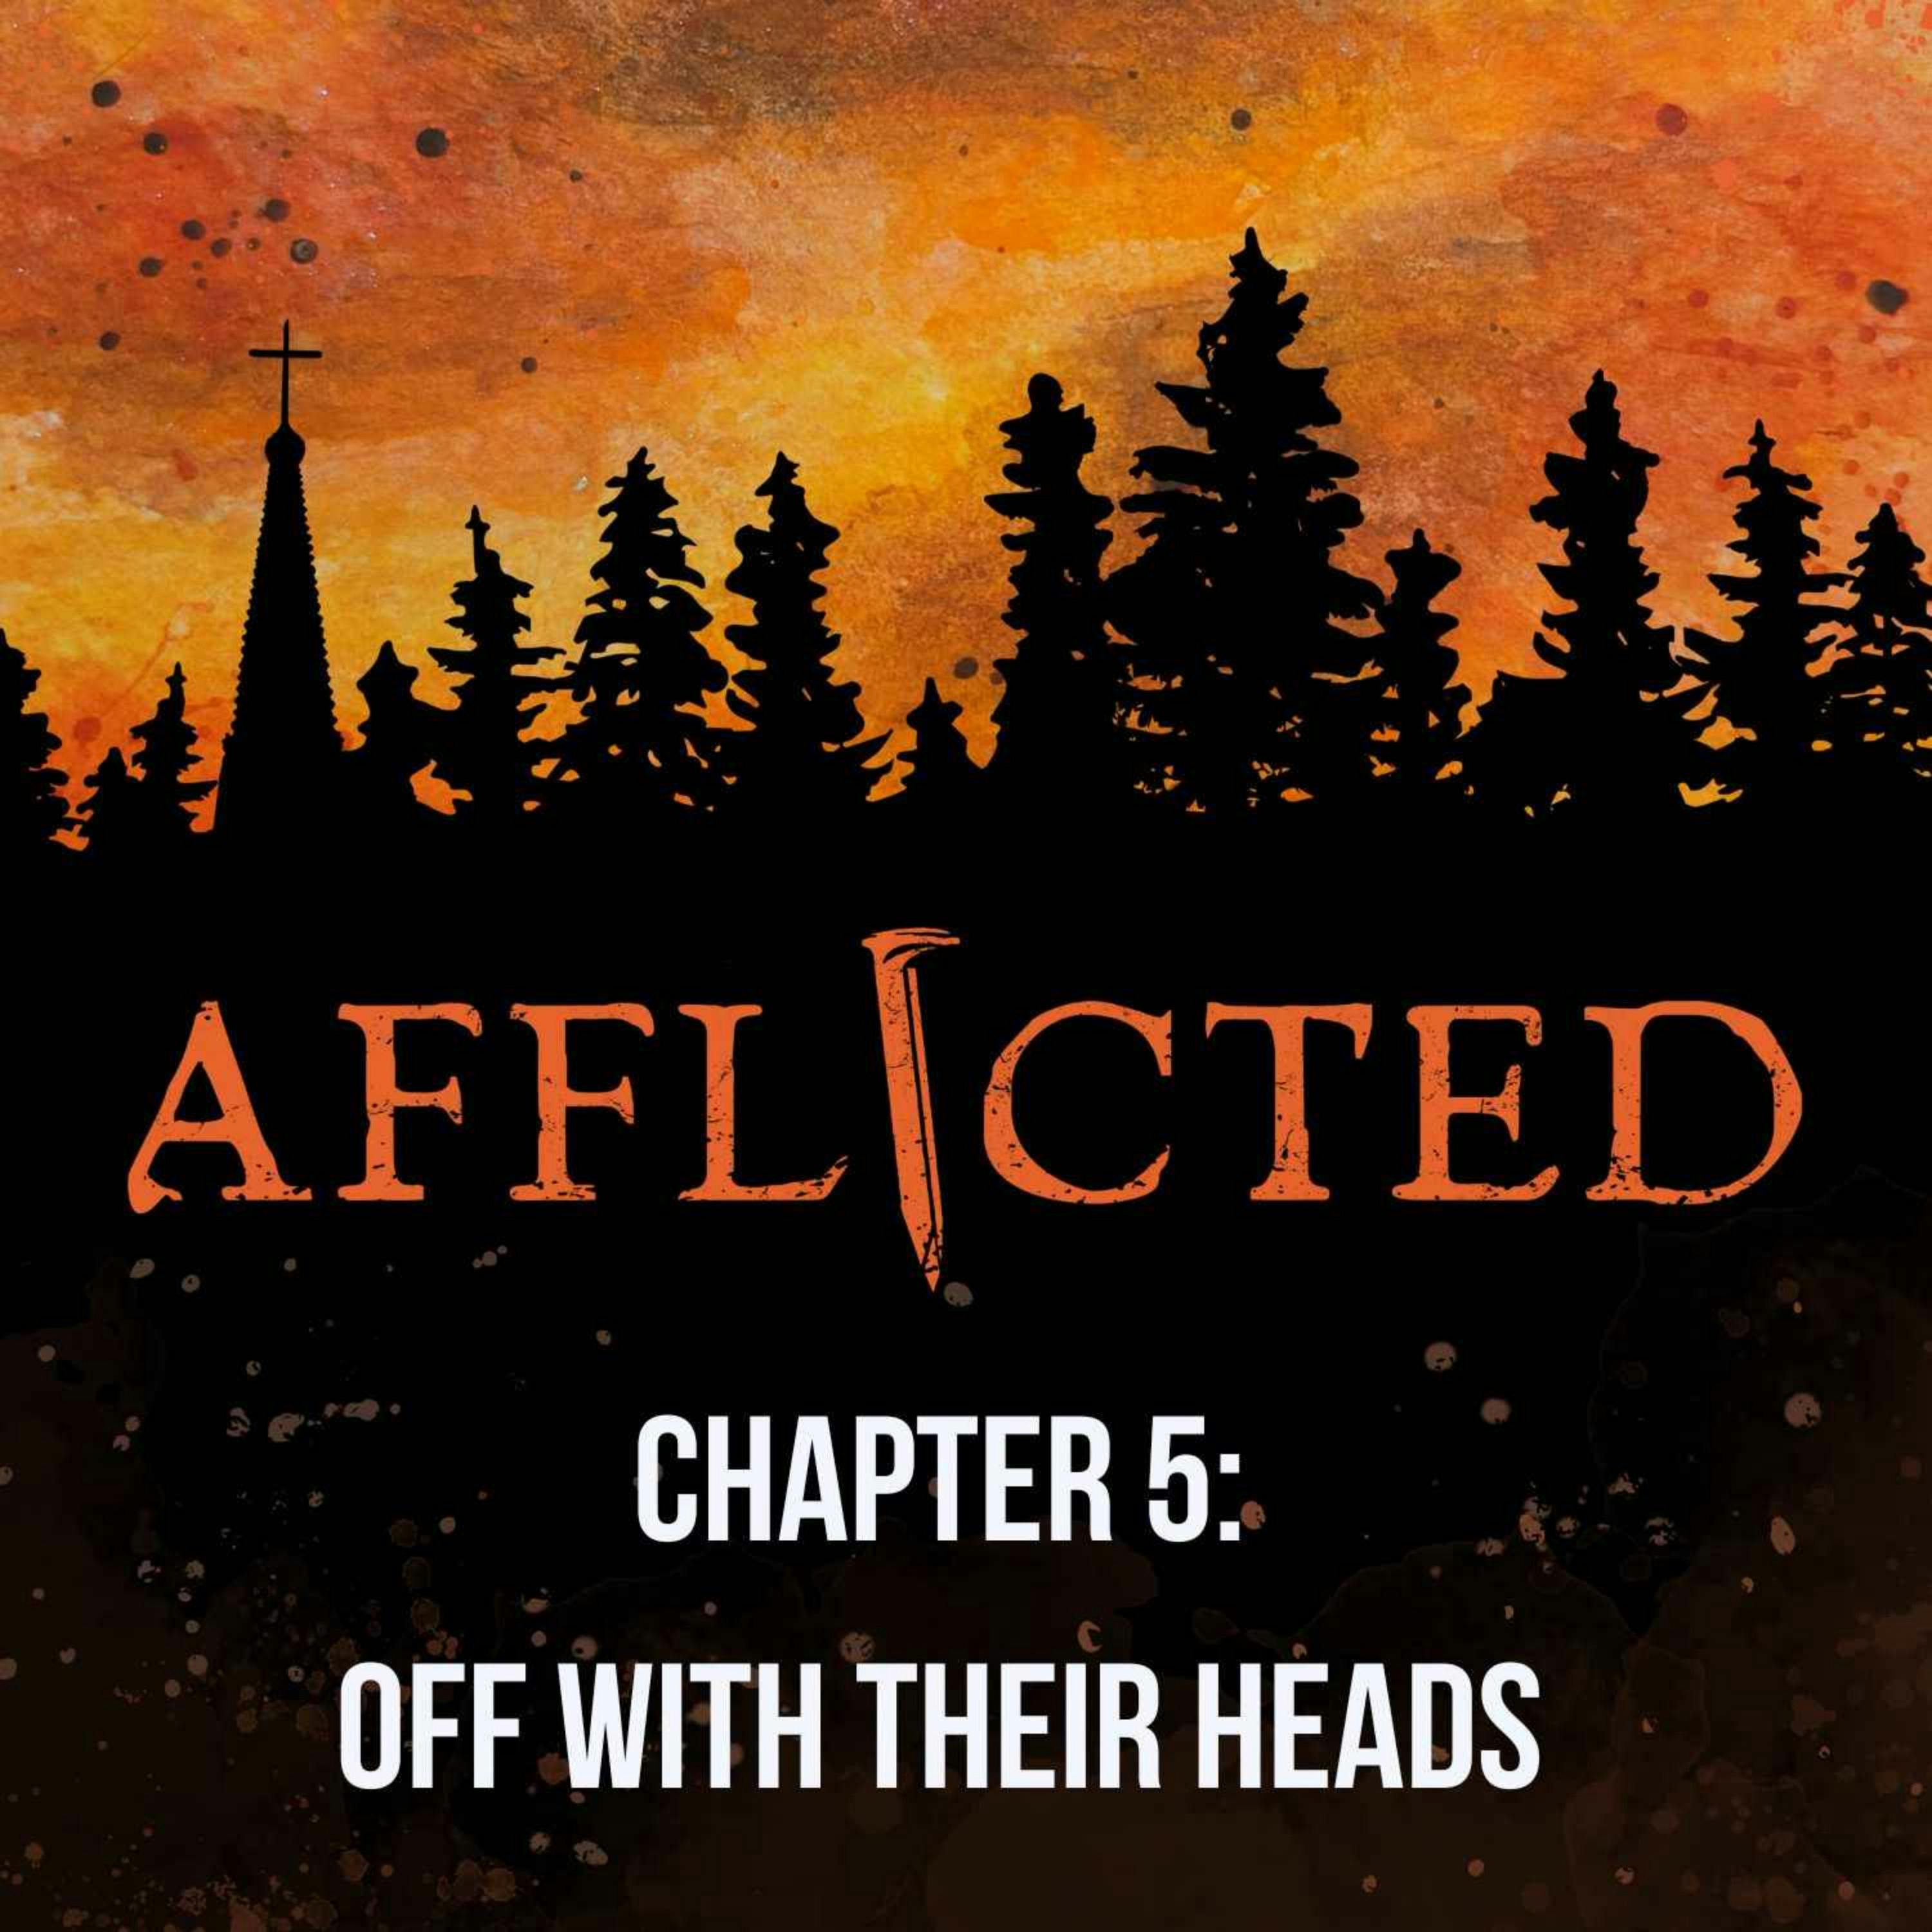 Chapter 5: Off With Their Heads